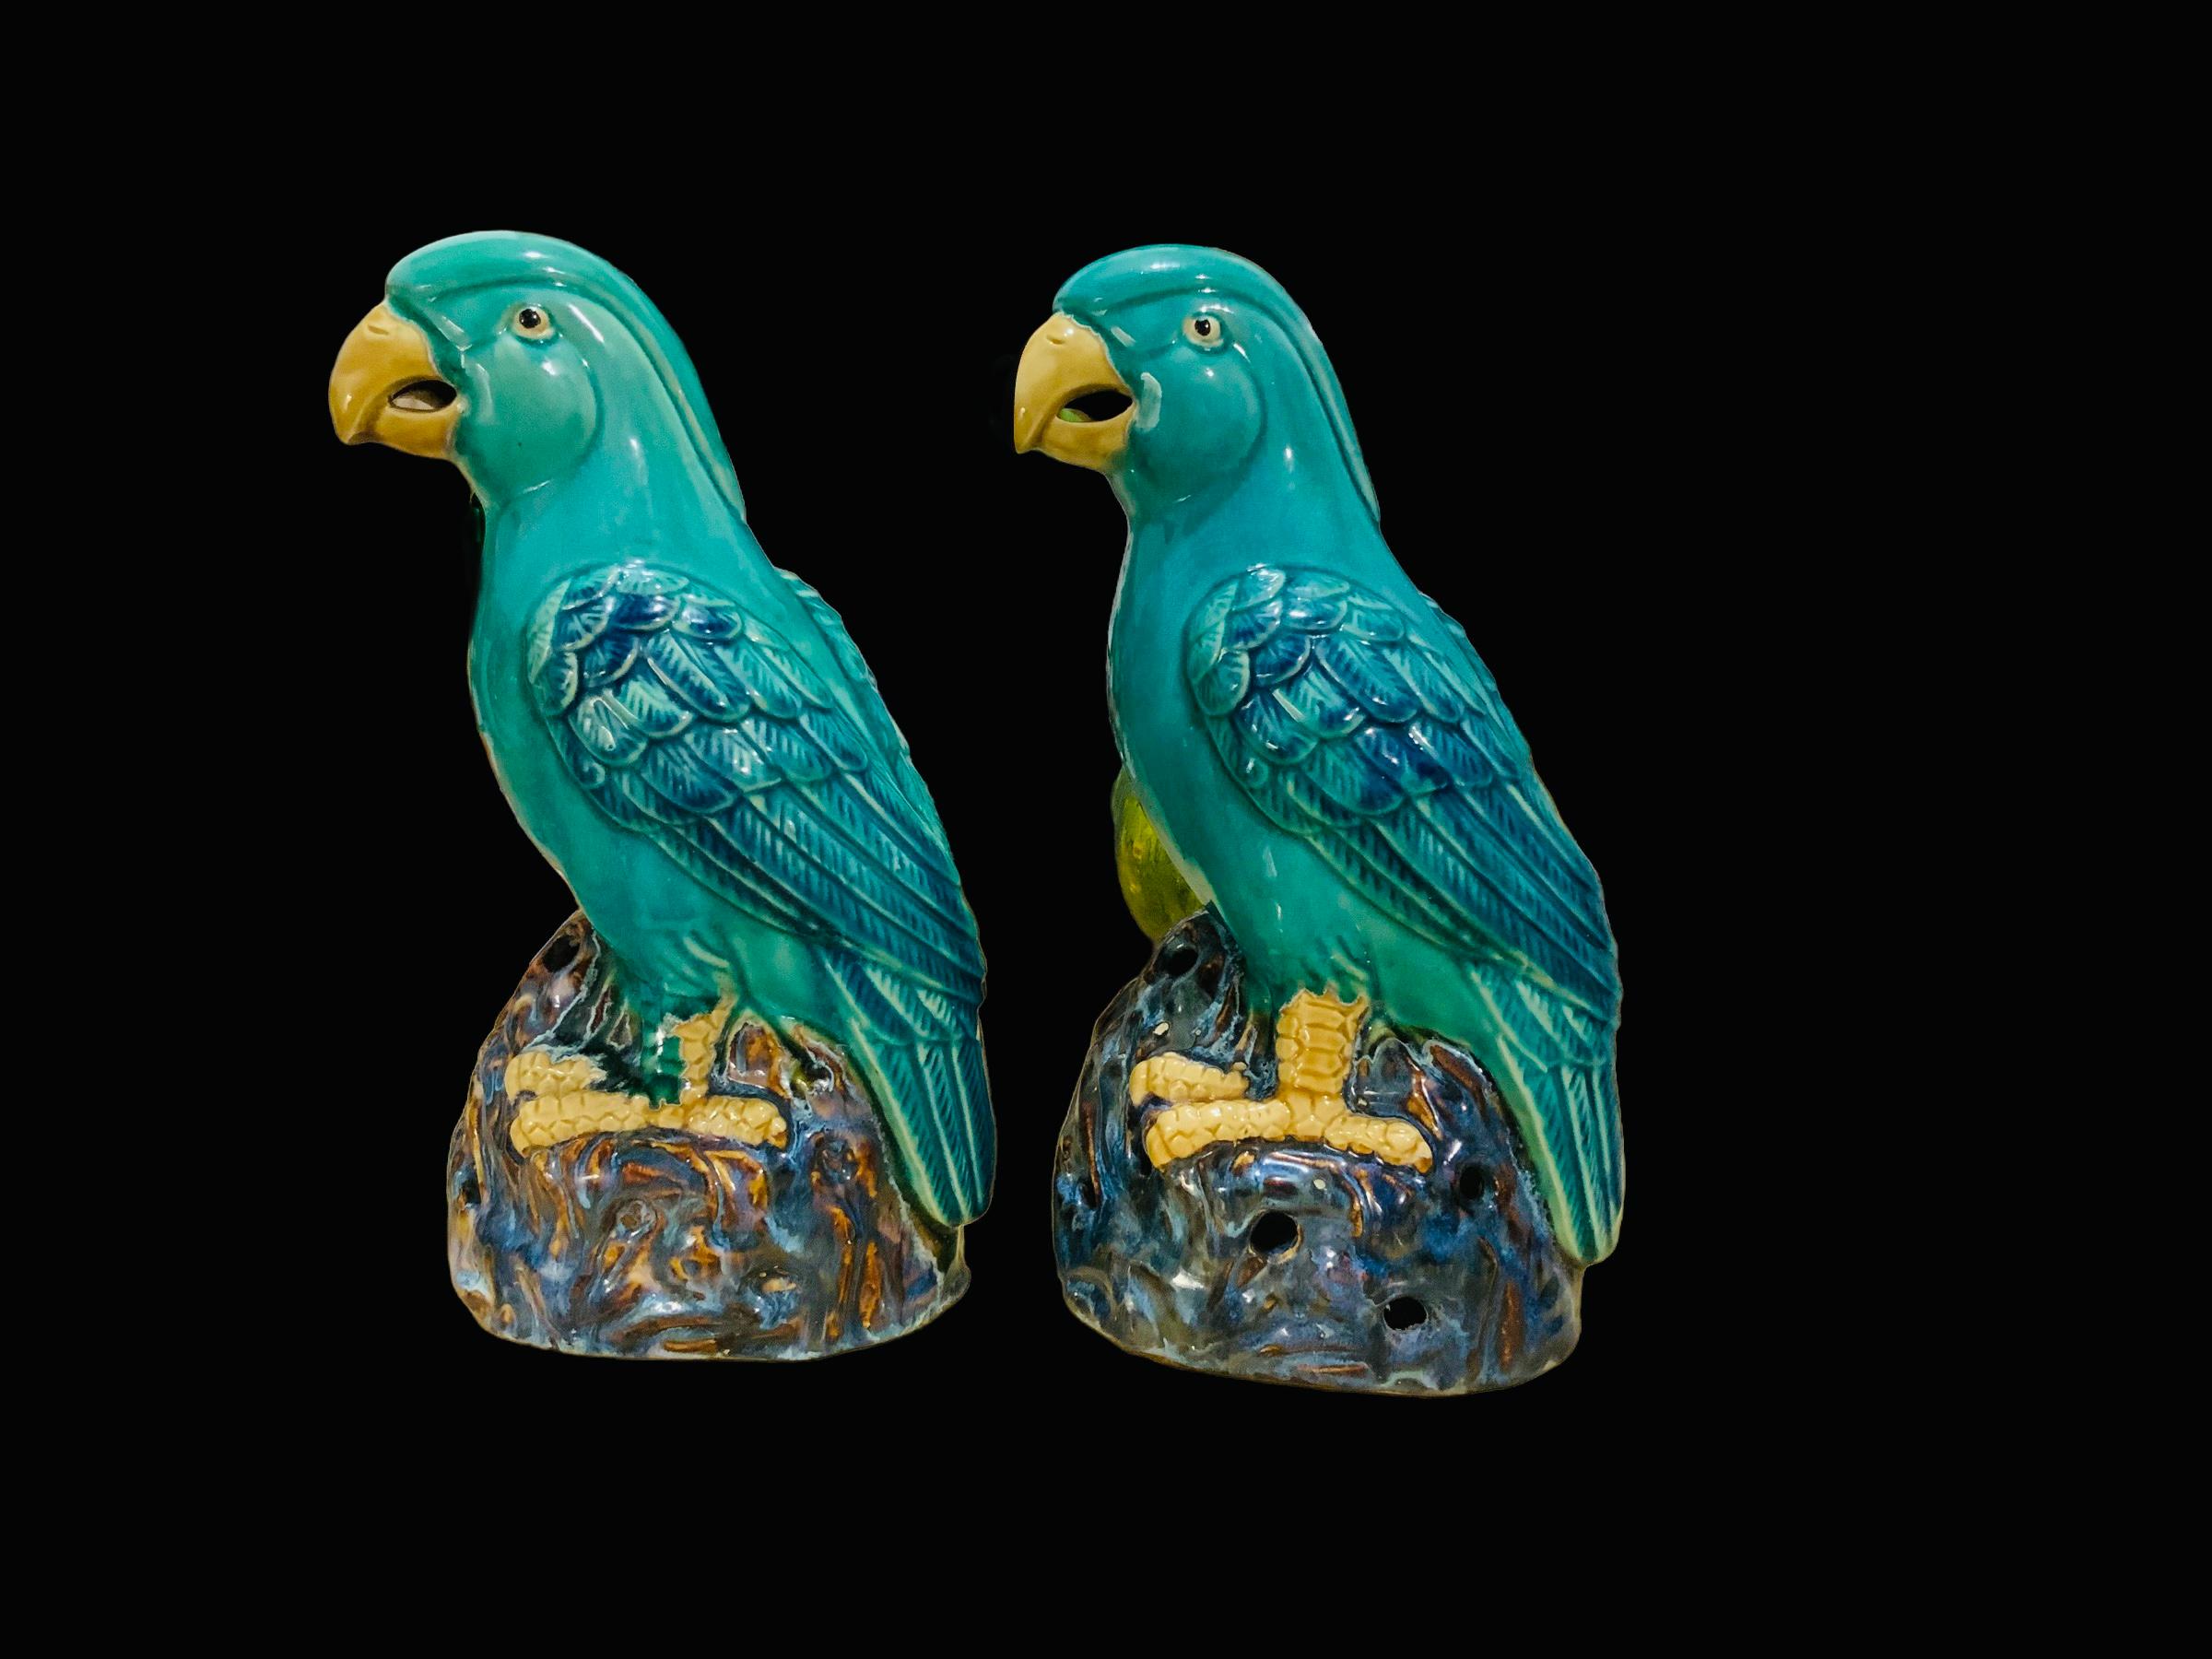 This is a pair of Chinese hand painted ceramic parrots. They catch your eyes wherever you display them. They are large and heavy. The light turquoise color of their bodies with royal blue details in their feathers enhance their yellow peaks and